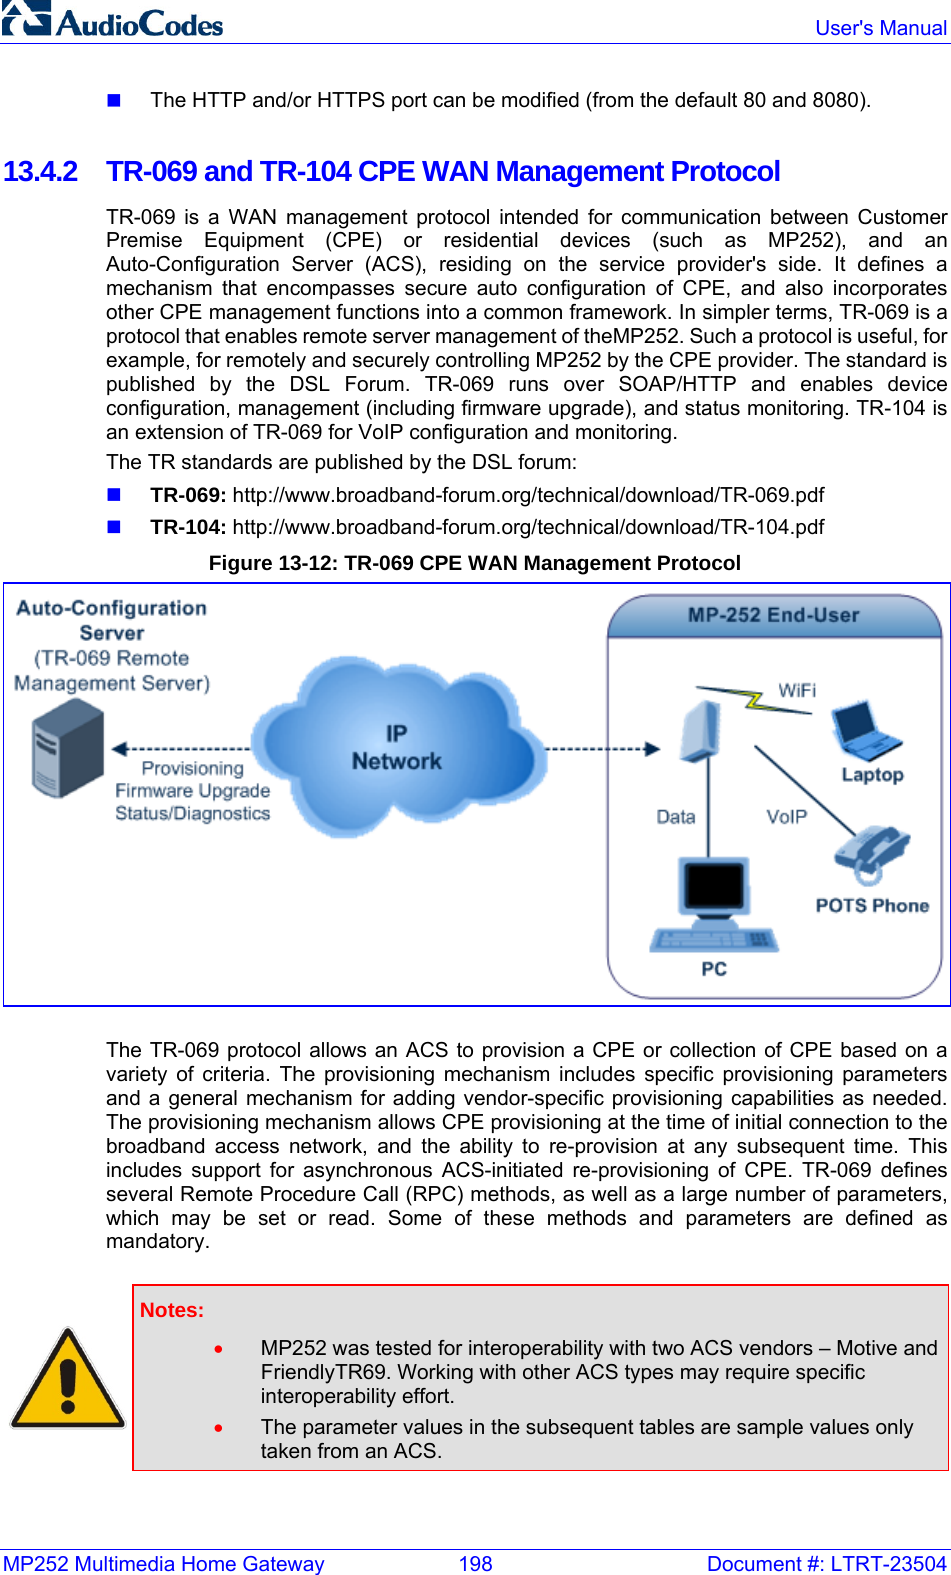 MP252 Multimedia Home Gateway  198  Document #: LTRT-23504  User&apos;s Manual   The HTTP and/or HTTPS port can be modified (from the default 80 and 8080).  13.4.2  TR-069 and TR-104 CPE WAN Management Protocol TR-069 is a WAN management protocol intended for communication between Customer Premise Equipment (CPE) or residential devices (such as MP252), and an Auto-Configuration Server (ACS), residing on the service provider&apos;s side. It defines a mechanism that encompasses secure auto configuration of CPE, and also incorporates other CPE management functions into a common framework. In simpler terms, TR-069 is a protocol that enables remote server management of theMP252. Such a protocol is useful, for example, for remotely and securely controlling MP252 by the CPE provider. The standard is published by the DSL Forum. TR-069 runs over SOAP/HTTP and enables device configuration, management (including firmware upgrade), and status monitoring. TR-104 is an extension of TR-069 for VoIP configuration and monitoring. The TR standards are published by the DSL forum:  TR-069: http://www.broadband-forum.org/technical/download/TR-069.pdf   TR-104: http://www.broadband-forum.org/technical/download/TR-104.pdf  Figure 13-12: TR-069 CPE WAN Management Protocol  The TR-069 protocol allows an ACS to provision a CPE or collection of CPE based on a variety of criteria. The provisioning mechanism includes specific provisioning parameters and a general mechanism for adding vendor-specific provisioning capabilities as needed. The provisioning mechanism allows CPE provisioning at the time of initial connection to the broadband access network, and the ability to re-provision at any subsequent time. This includes support for asynchronous ACS-initiated re-provisioning of CPE. TR-069 defines several Remote Procedure Call (RPC) methods, as well as a large number of parameters, which may be set or read. Some of these methods and parameters are defined as mandatory.    Notes:  • MP252 was tested for interoperability with two ACS vendors – Motive and FriendlyTR69. Working with other ACS types may require specific interoperability effort. • The parameter values in the subsequent tables are sample values only taken from an ACS.   